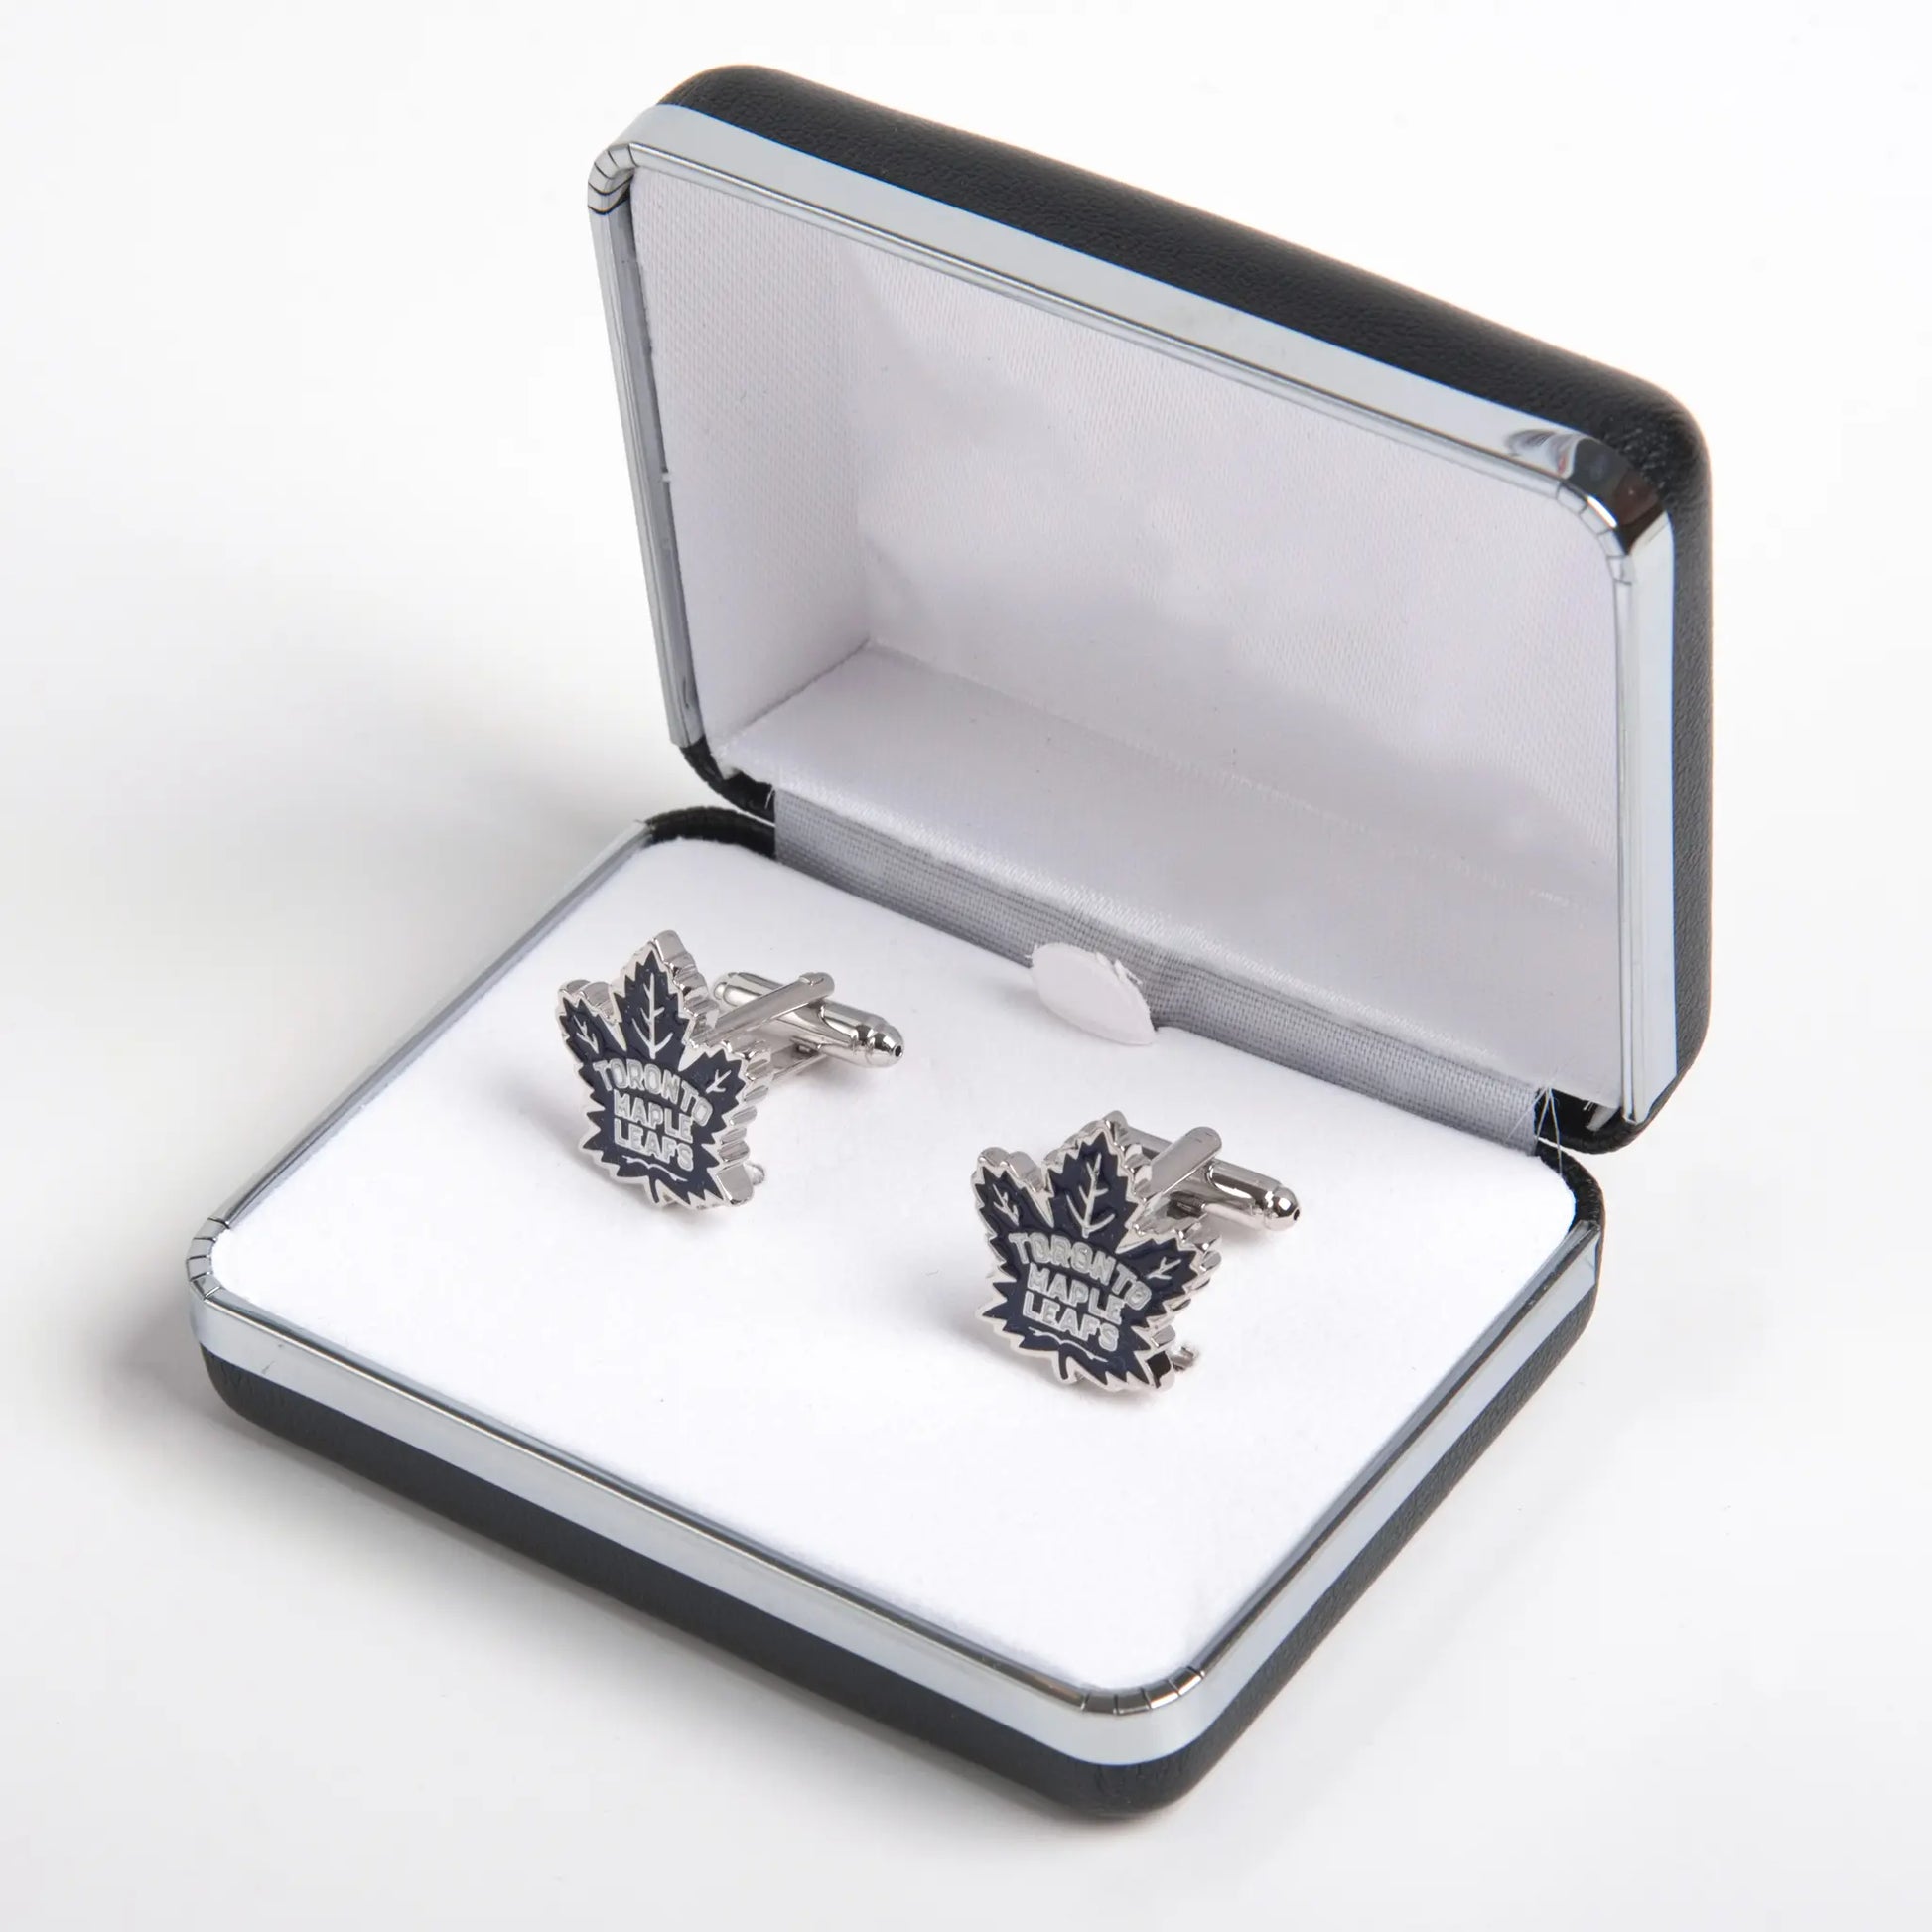 Maple Leaf Cuff Link - Larimars Clothing Men's Formal and casual wear shirts